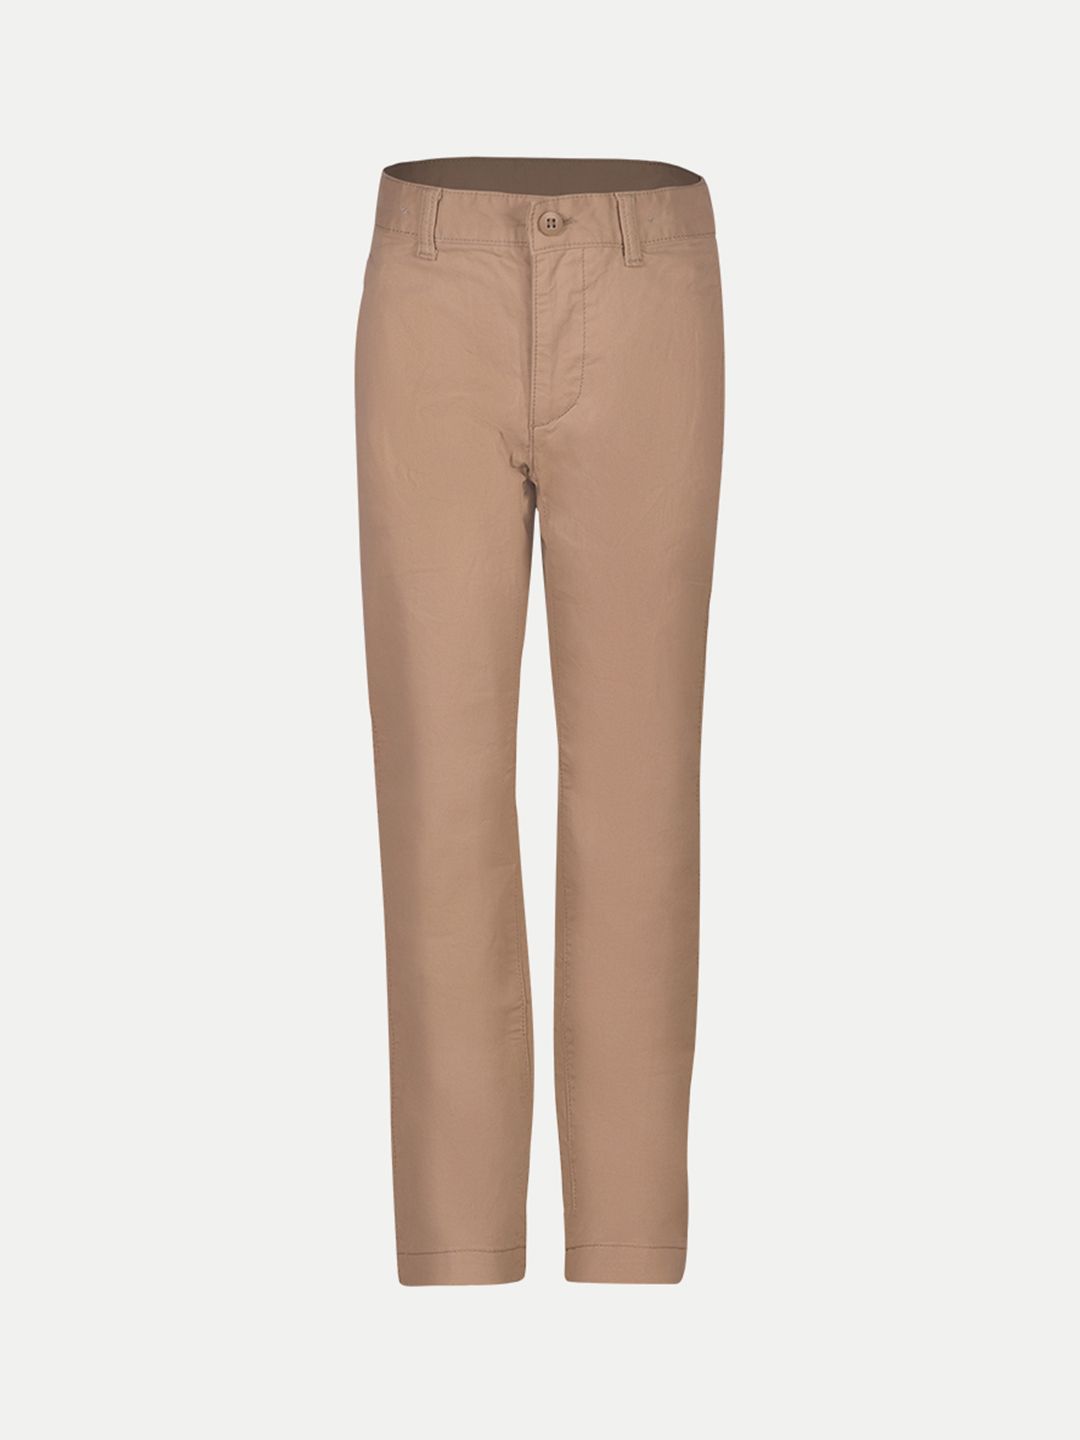 U.S. POLO ASSN. Slim Fit Boys Brown Trousers - Buy U.S. POLO ASSN. Slim Fit Boys  Brown Trousers Online at Best Prices in India | Flipkart.com